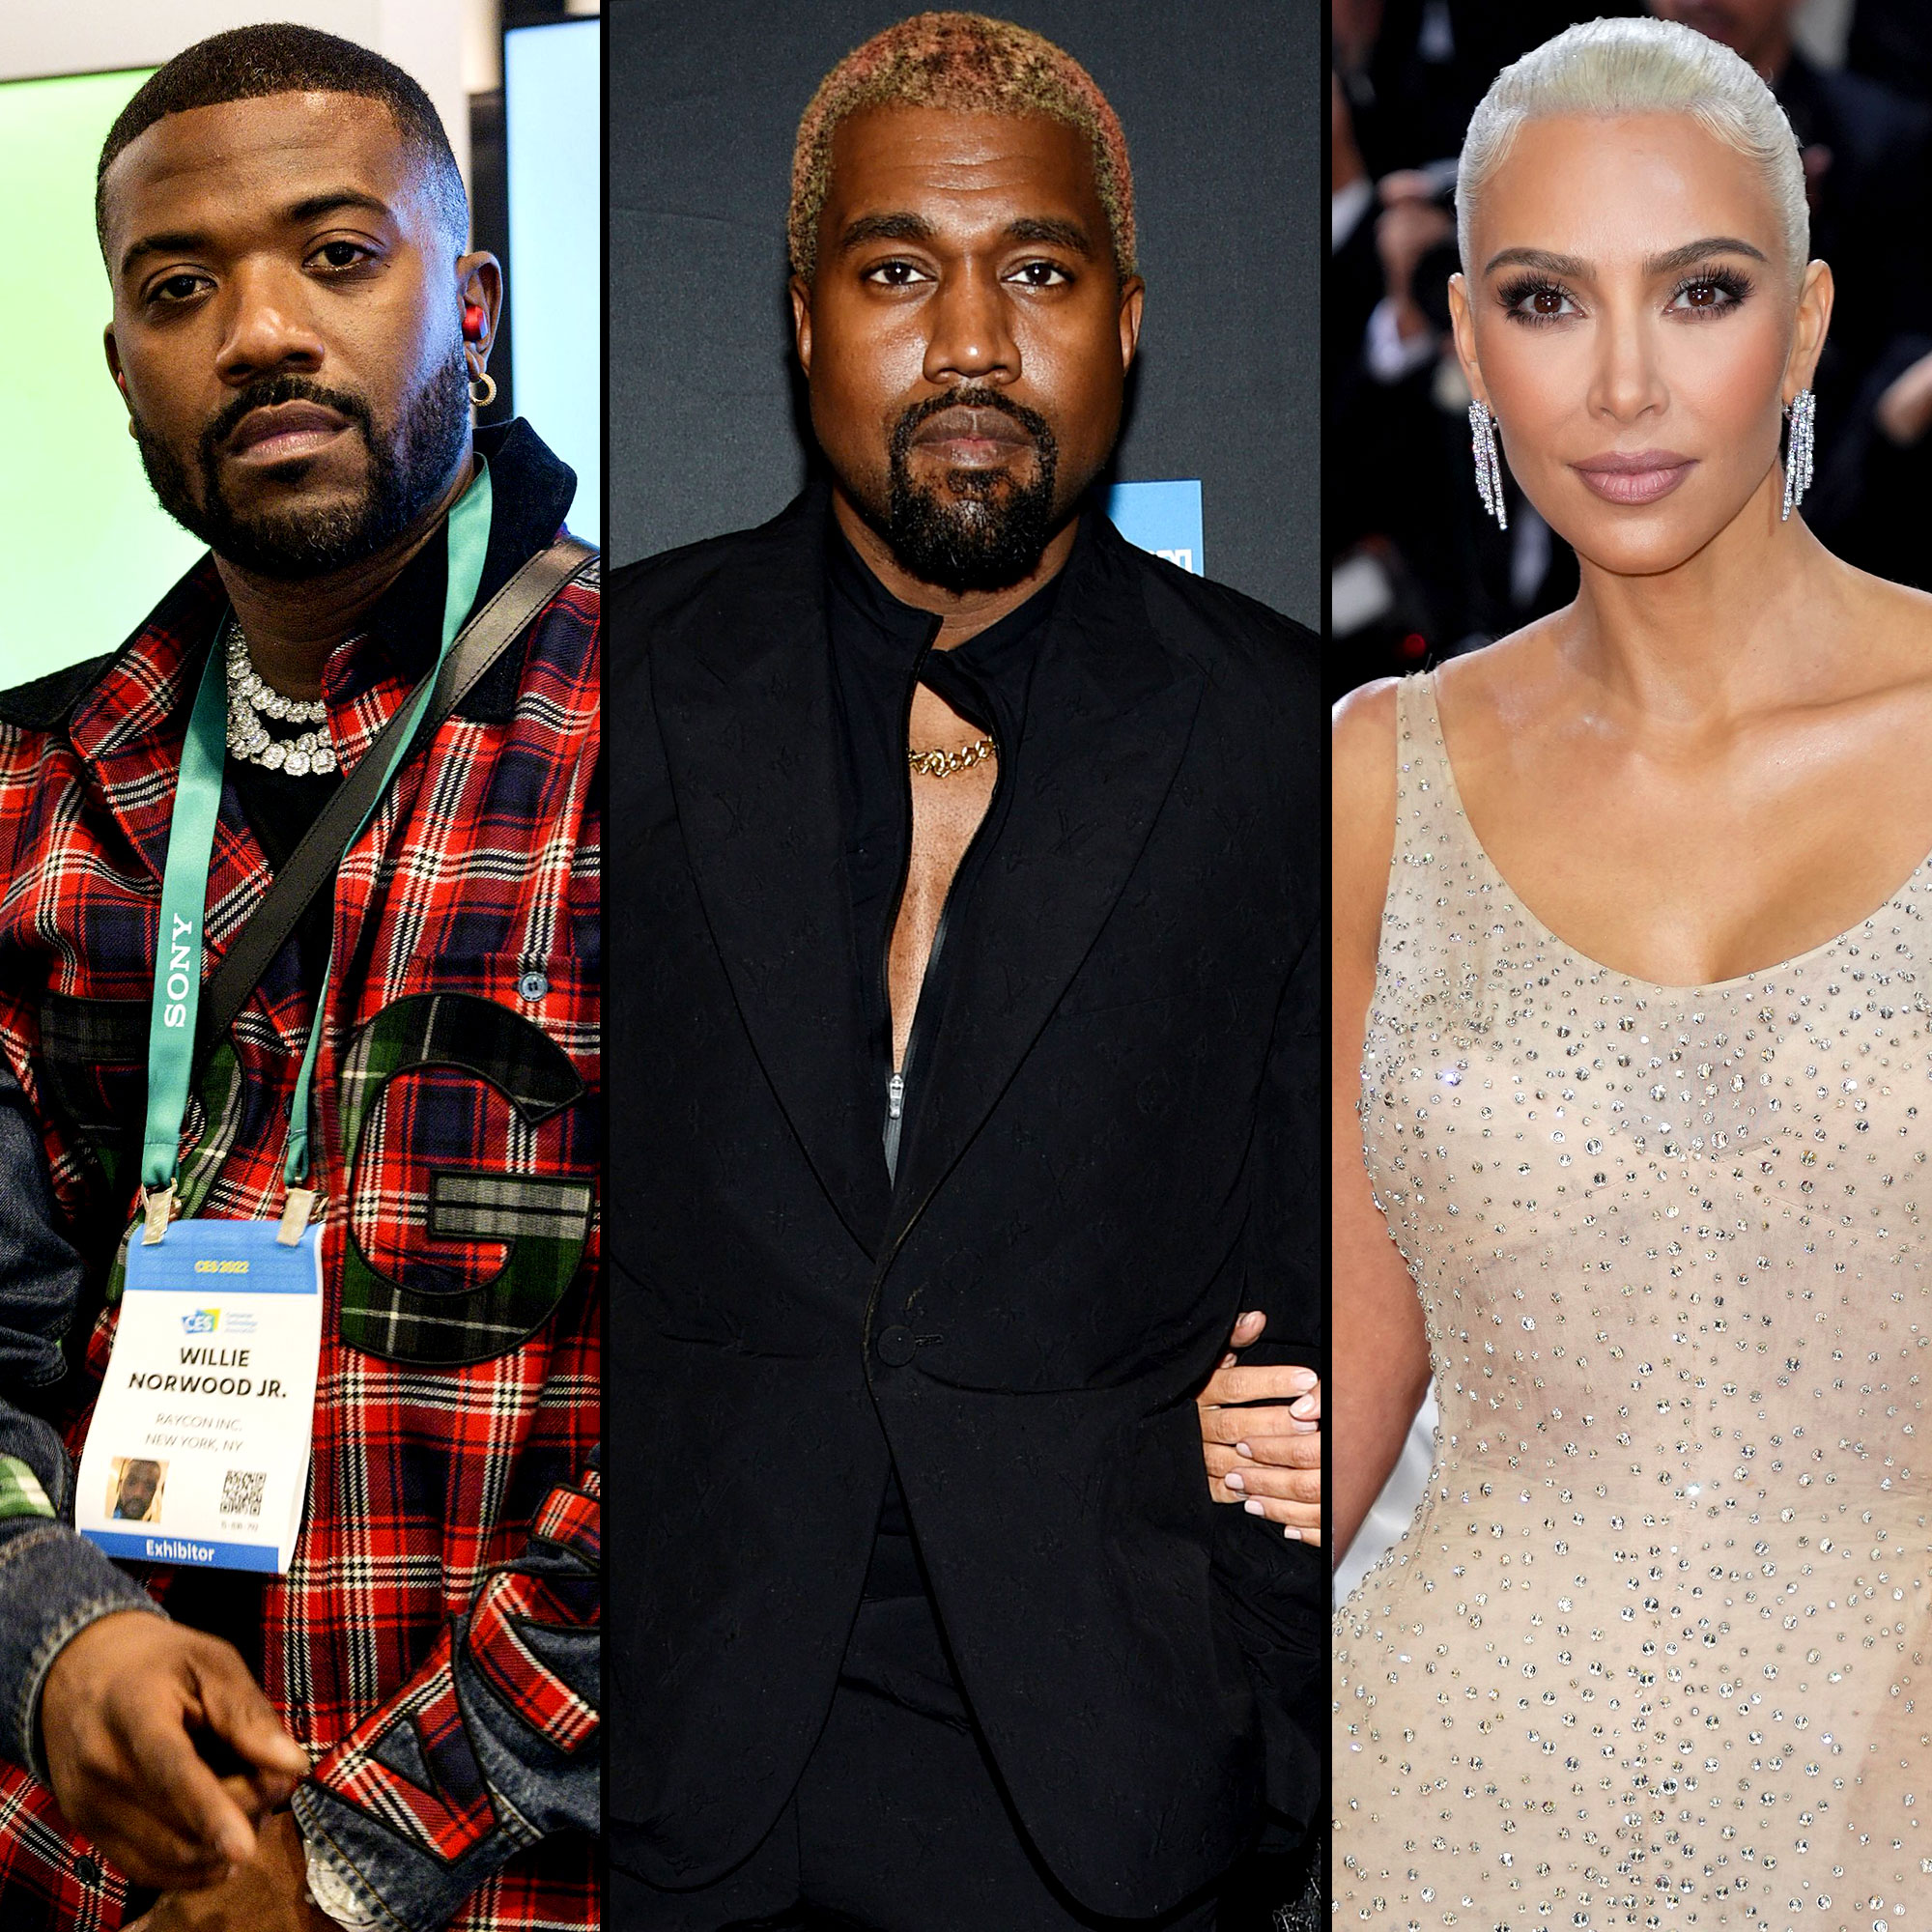 Ray J Details Meet-Up With Kanye West Over Kim Kardashian Sex Tape pic